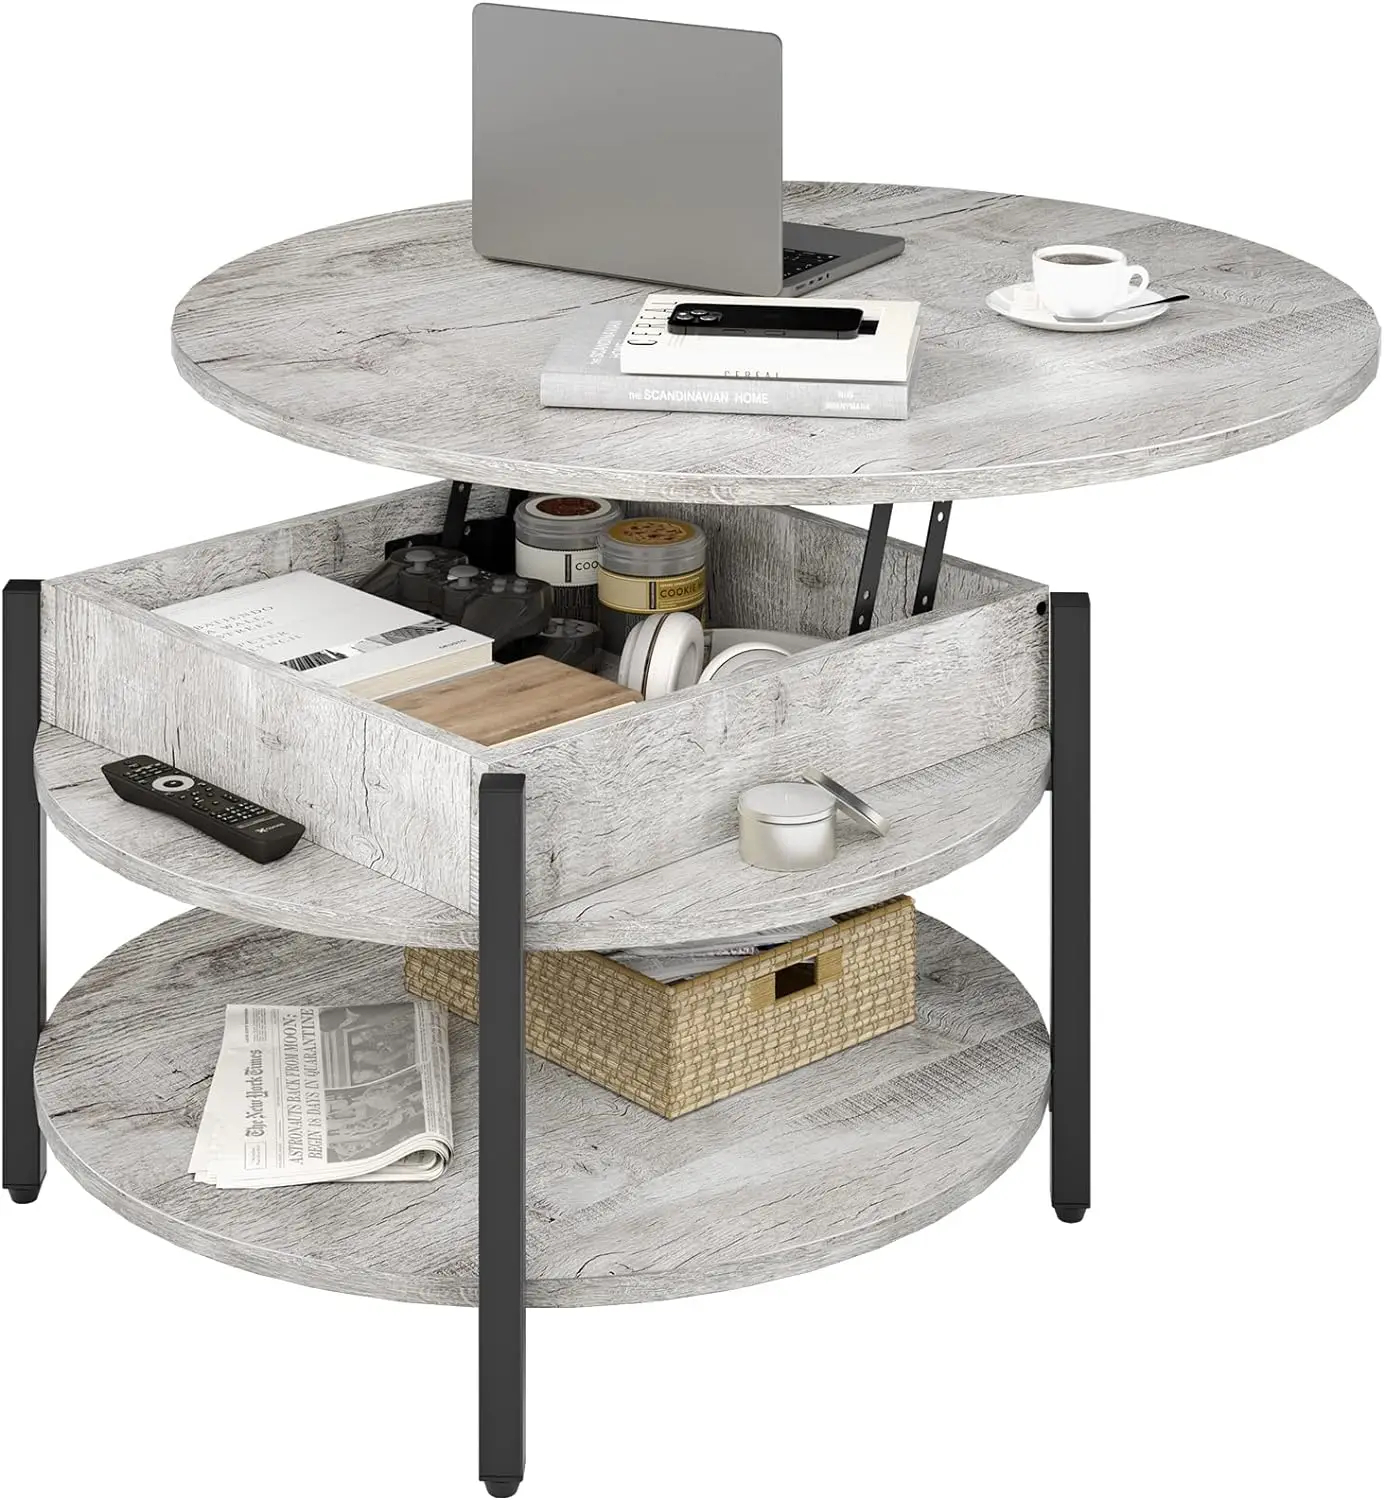 The Beauty of Customized Coffee Tables with Storage for Unique Spaces插图